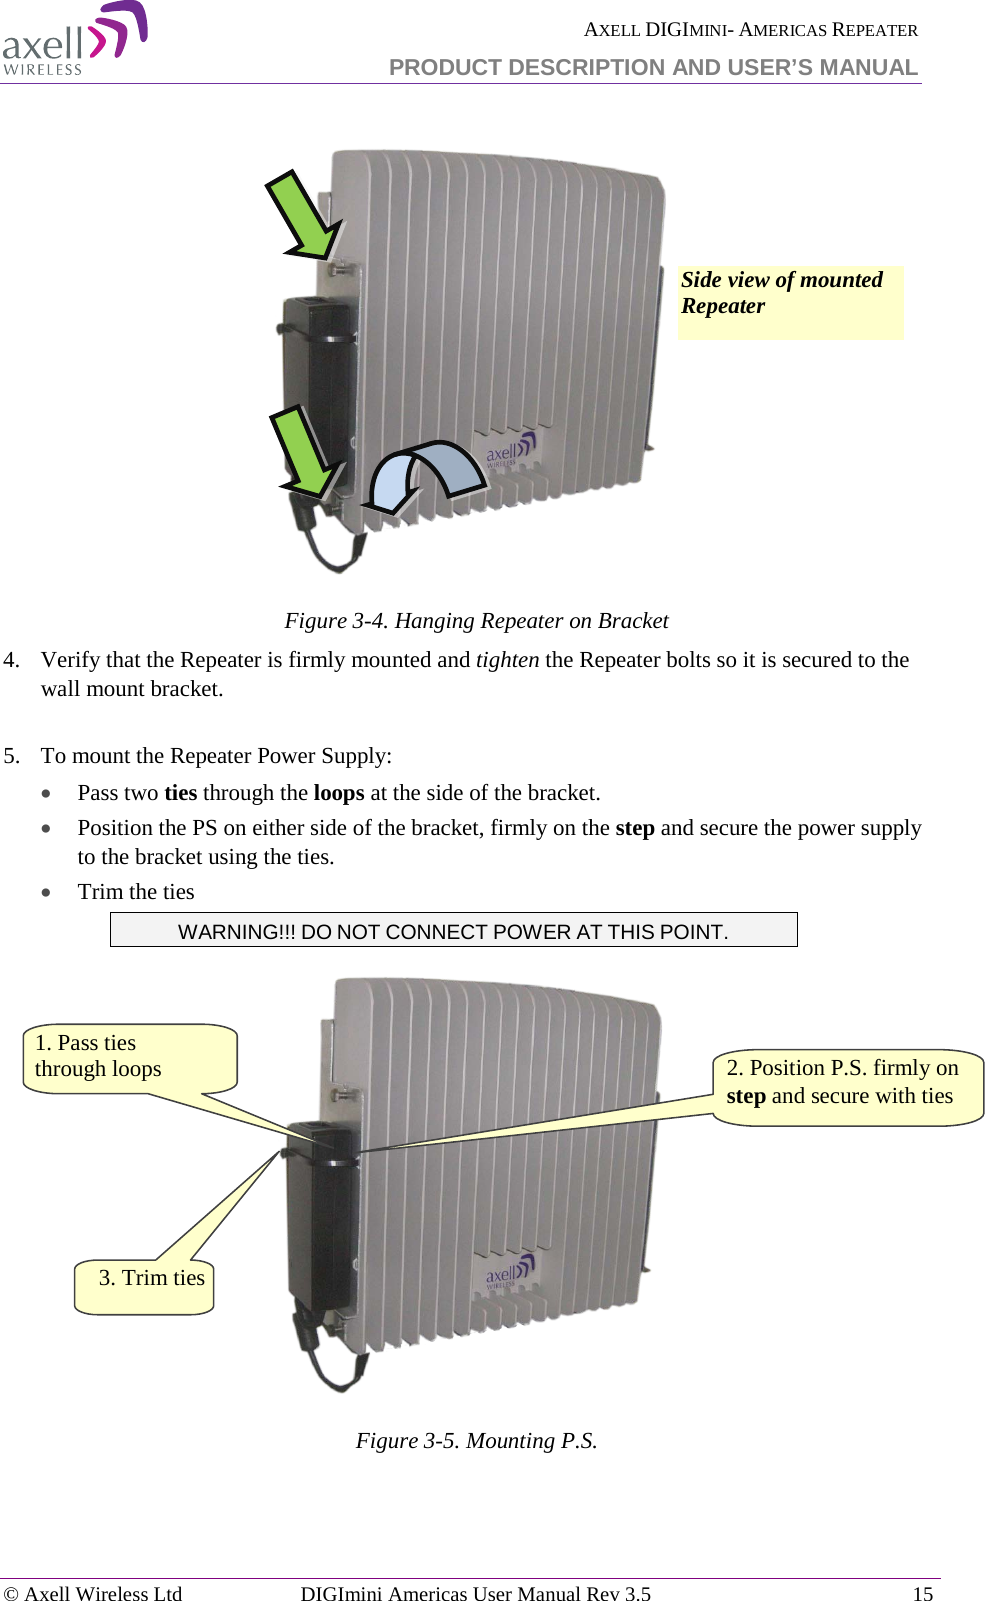  AXELL DIGIMINI- AMERICAS REPEATER PRODUCT DESCRIPTION AND USER’S MANUAL © Axell Wireless Ltd DIGImini Americas User Manual Rev 3.5  15    Figure  3-4. Hanging Repeater on Bracket 4.  Verify that the Repeater is firmly mounted and tighten the Repeater bolts so it is secured to the wall mount bracket.  5.  To mount the Repeater Power Supply: • Pass two ties through the loops at the side of the bracket. • Position the PS on either side of the bracket, firmly on the step and secure the power supply to the bracket using the ties. • Trim the ties WARNING!!! DO NOT CONNECT POWER AT THIS POINT.  Figure  3-5. Mounting P.S.   2. Position P.S. firmly on step and secure with ties  1. Pass ties  through loops Side view of mounted Repeater 3. Trim ties  